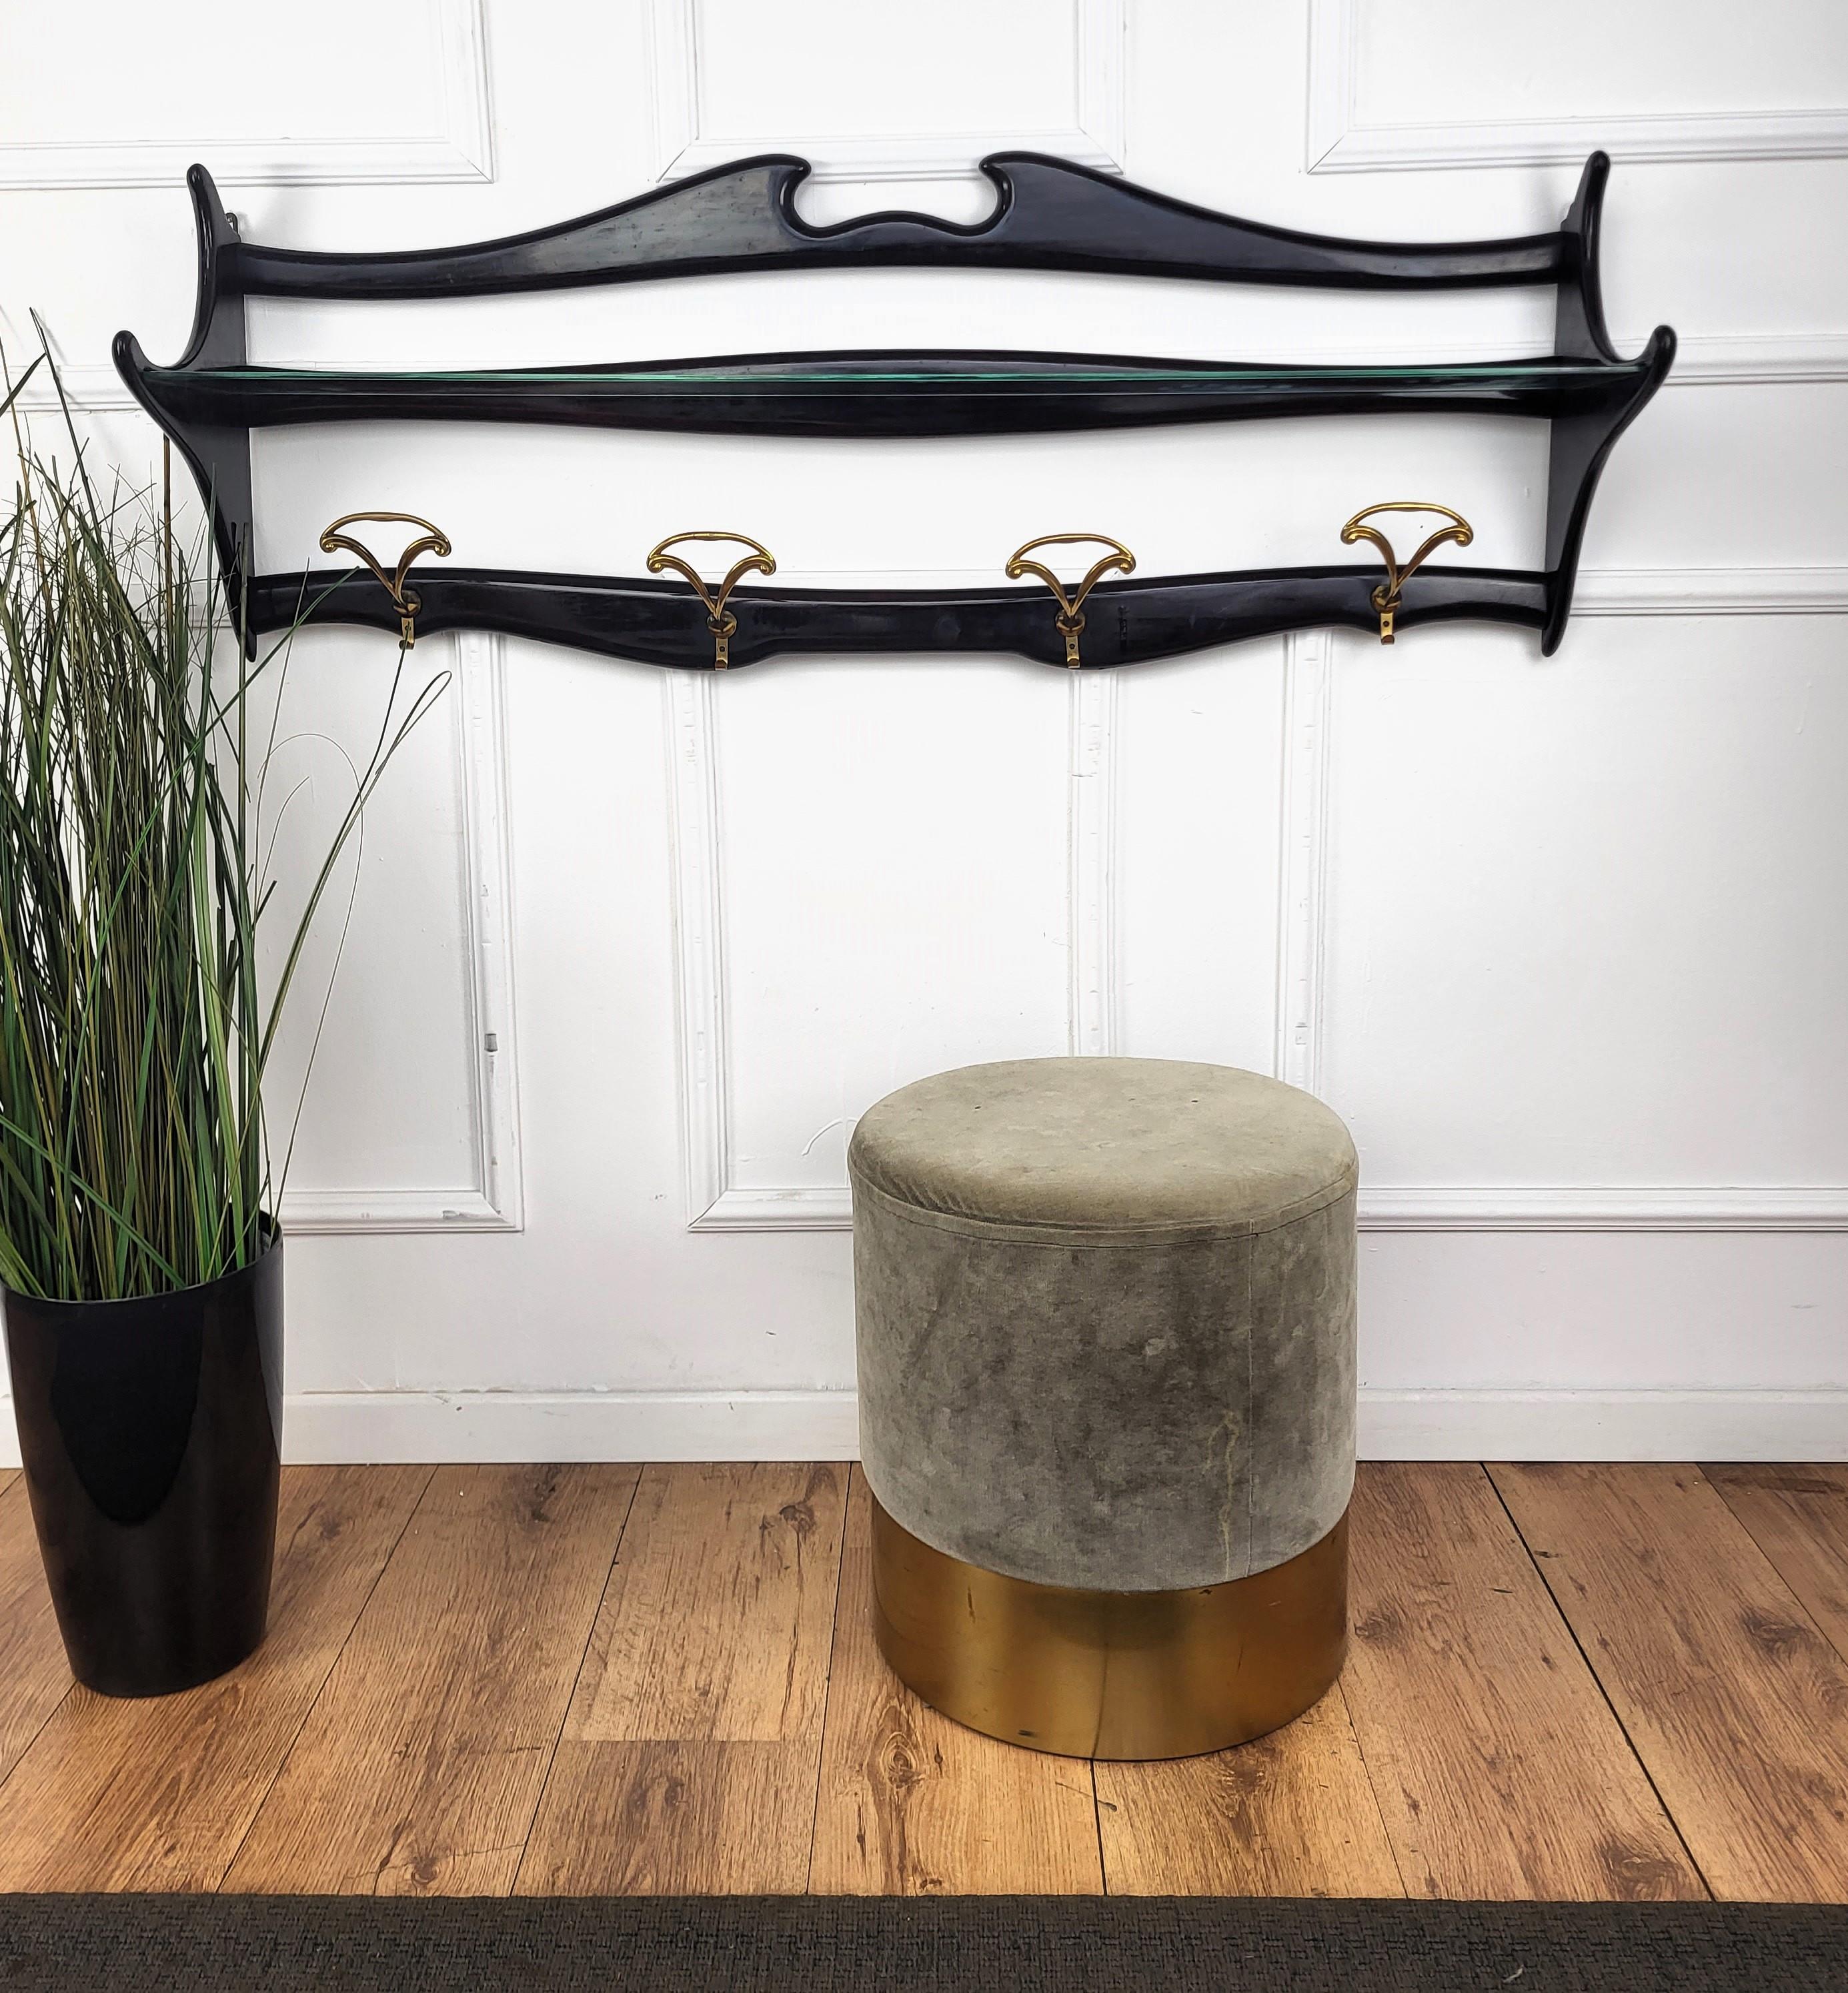 Beautiful 1960s Italian Chiavari style wall coat hanger in carved wood with great shiny black lacquer vintage patina solid structure with glass shelf and brass hangers. The shapely crest is typical of Chiavari style, mainly known for the chairs,